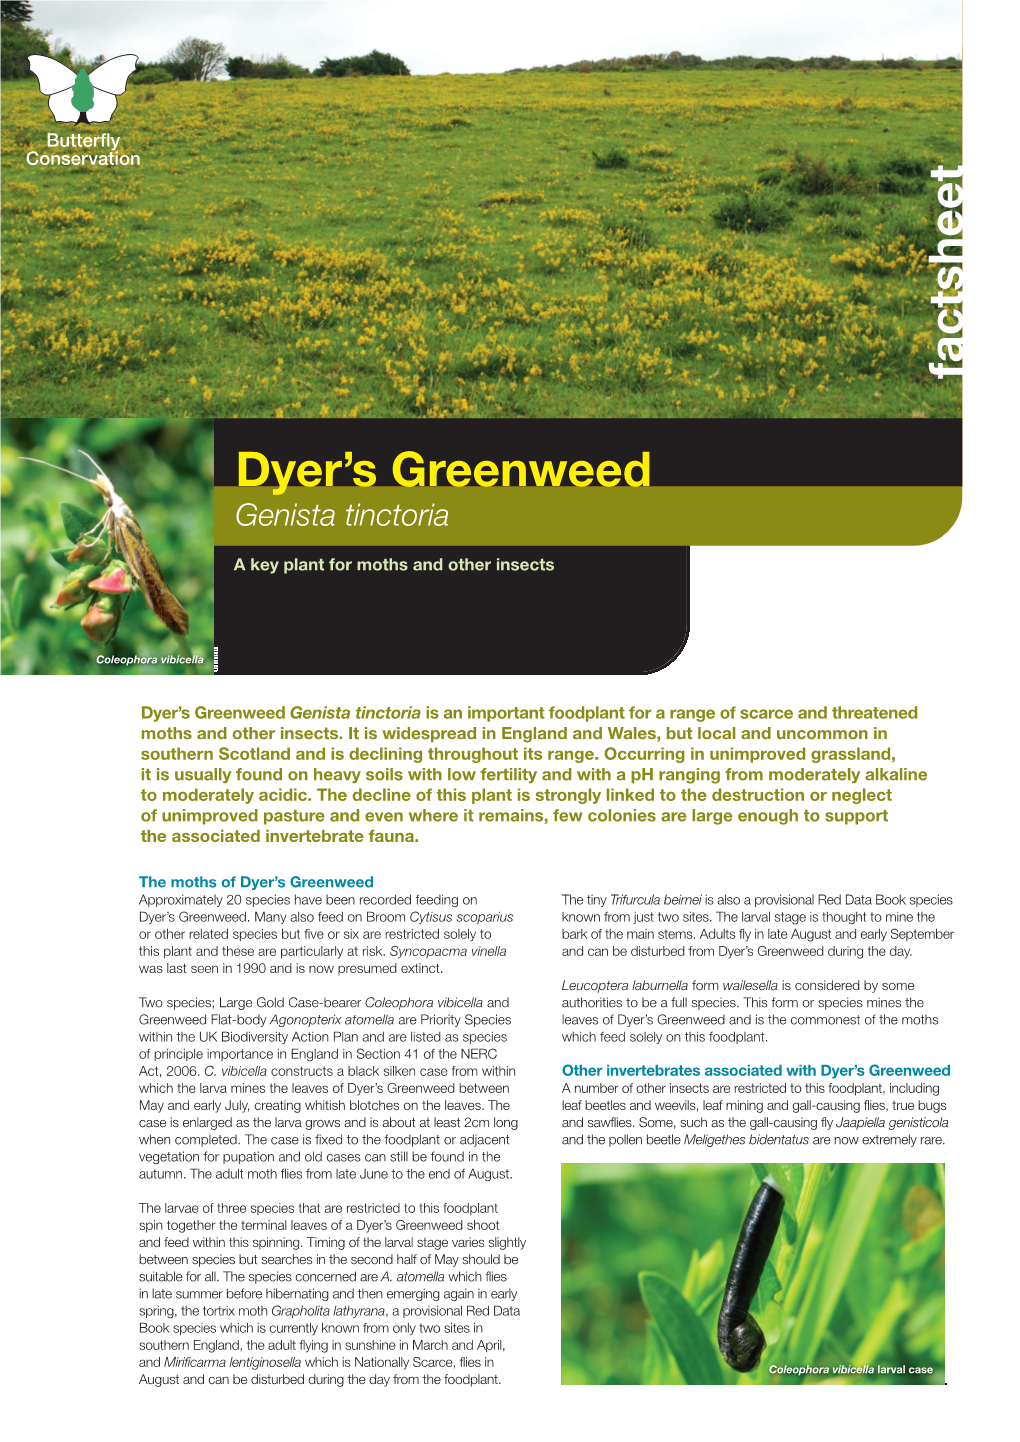 Dyer's Greenweed